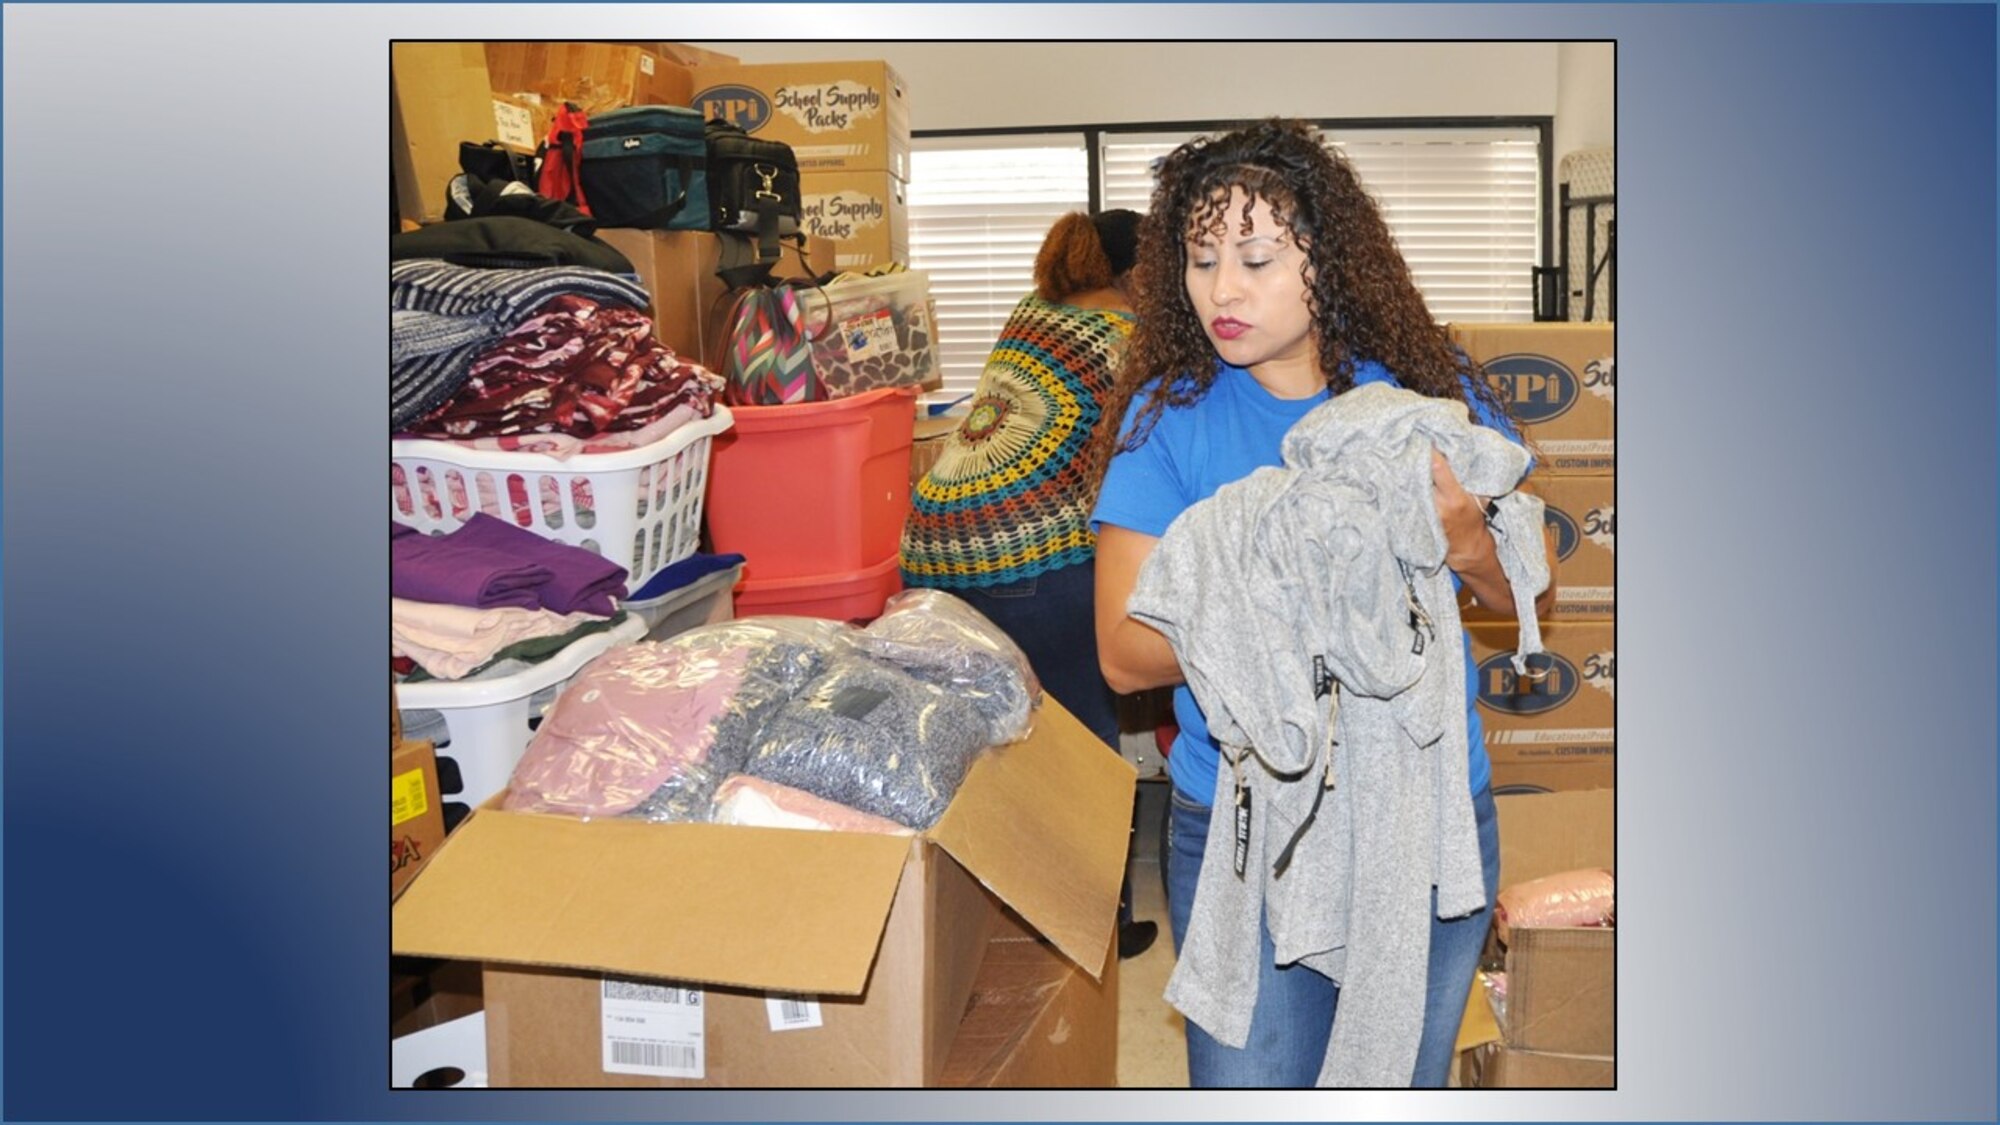 Master Sgt. Julia Tovar sorts clothing during a 340th Flying Training Group community outreach event Sept. 11 at the San Antonio, Texas Family Violence Prevention Services/Battered Women and Children’s Shelter’s Donation Center. (U.S. Air Force graphic by Janis El Shabazz)